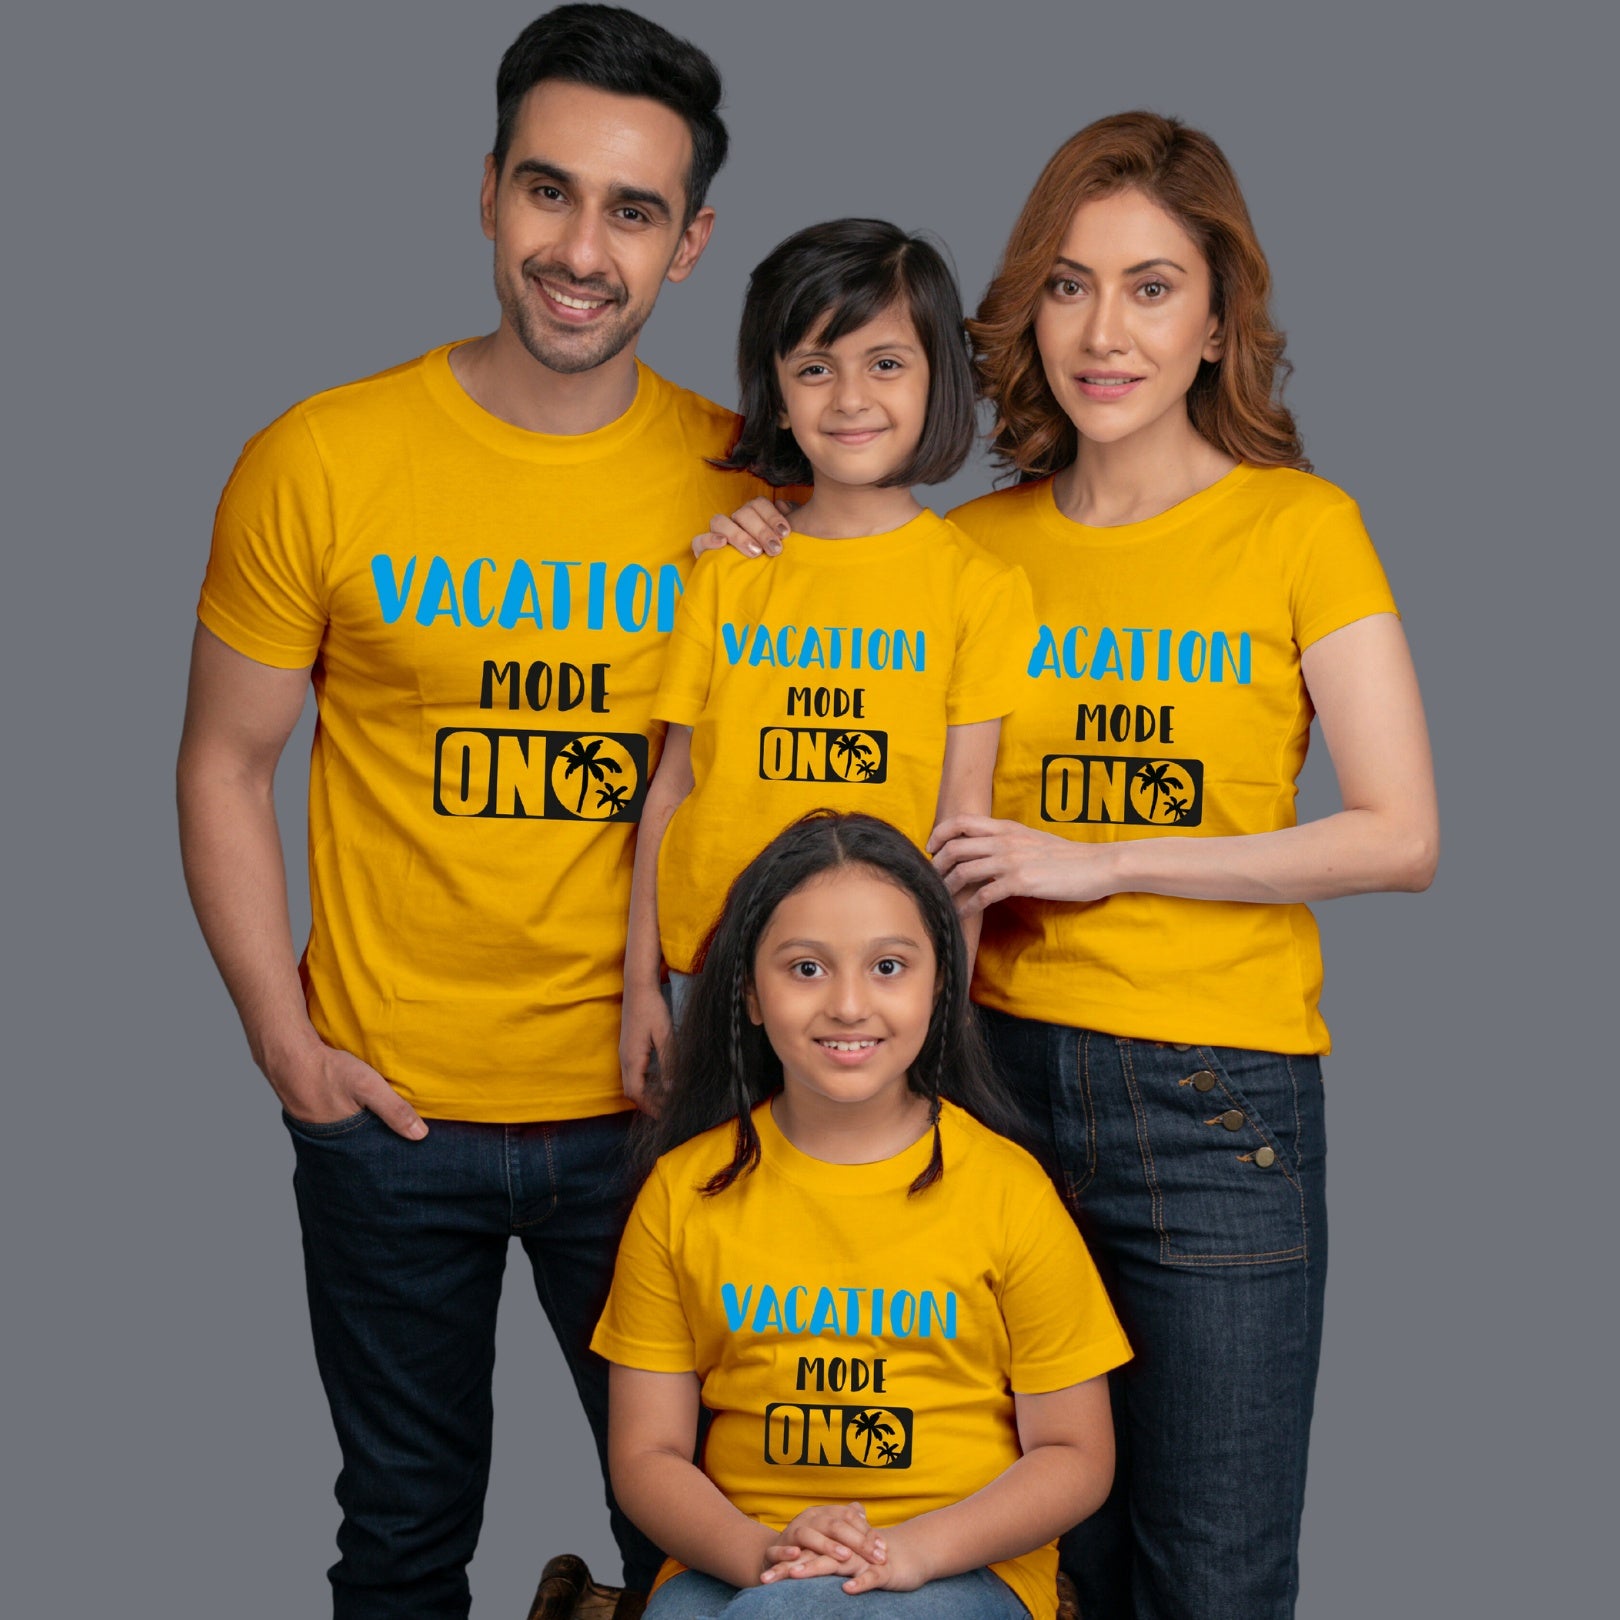 Family t shirts set of 4 Mom Dad Two Daughters in Yellow Colour - Vacation Mode On Variant